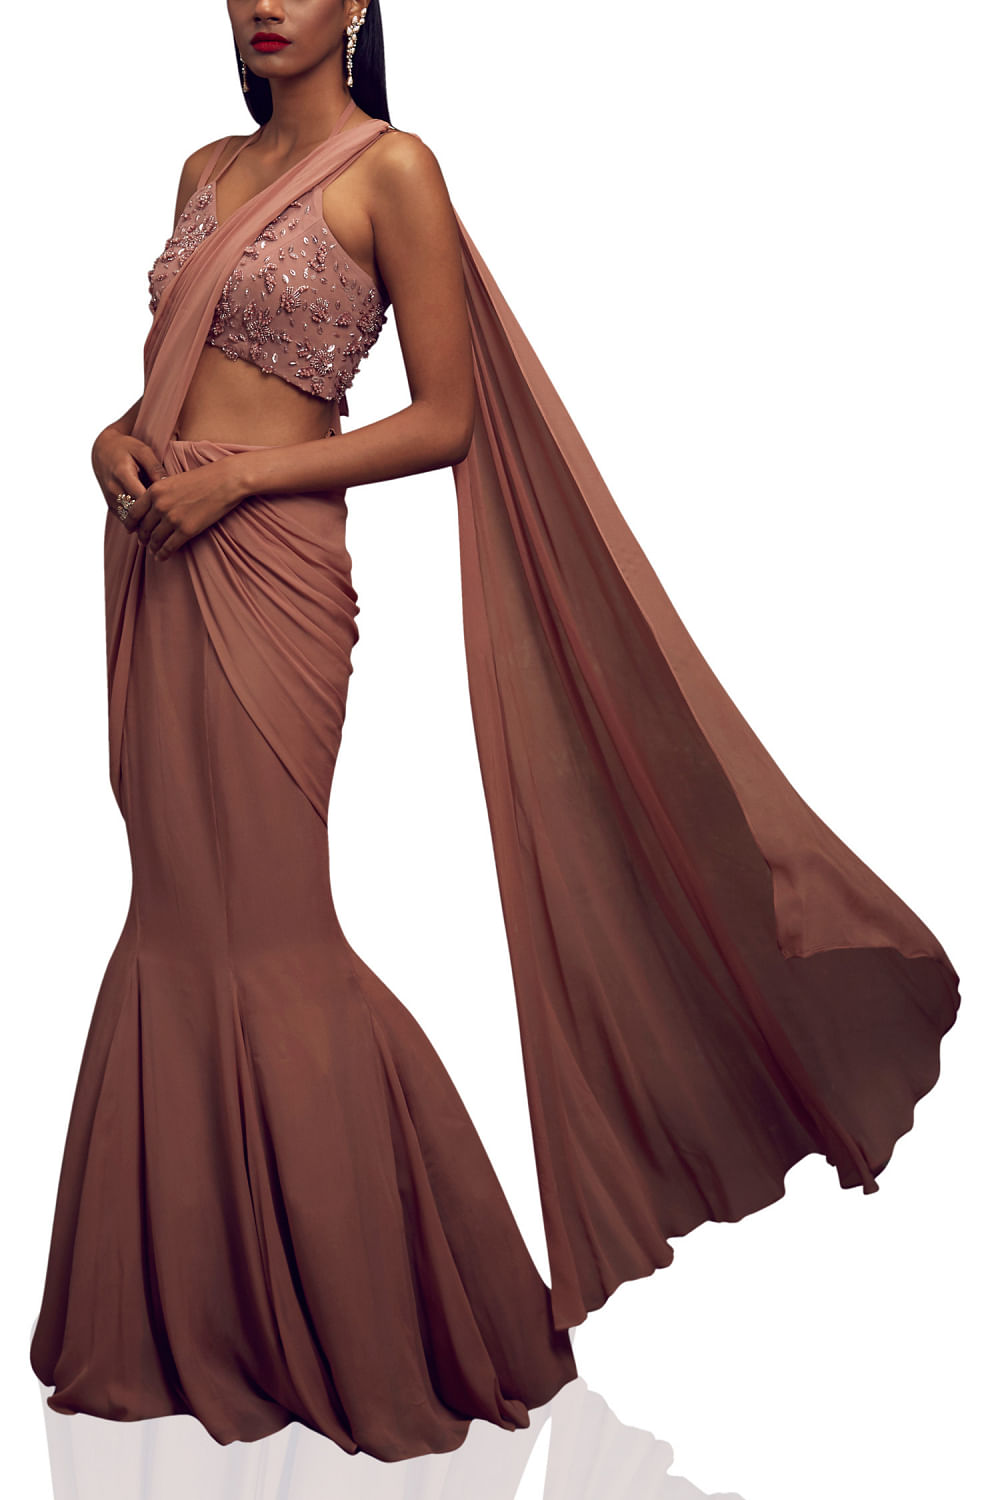 Buy Dusty rose fishtail saree gown by Shloka Khialani at Aashni and Co